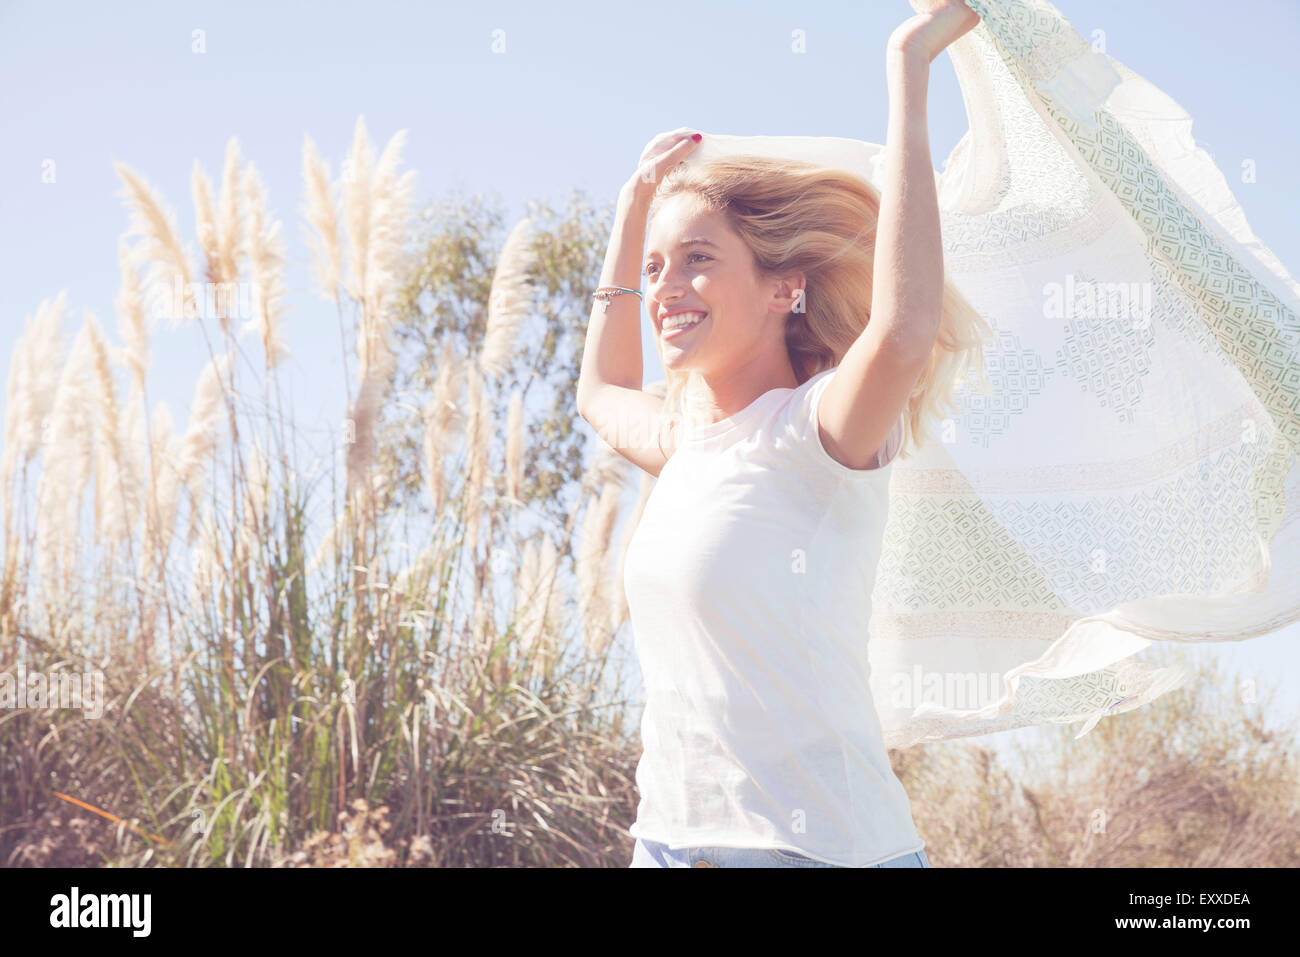 Woman holding up scarf fluttering in wind Stock Photo